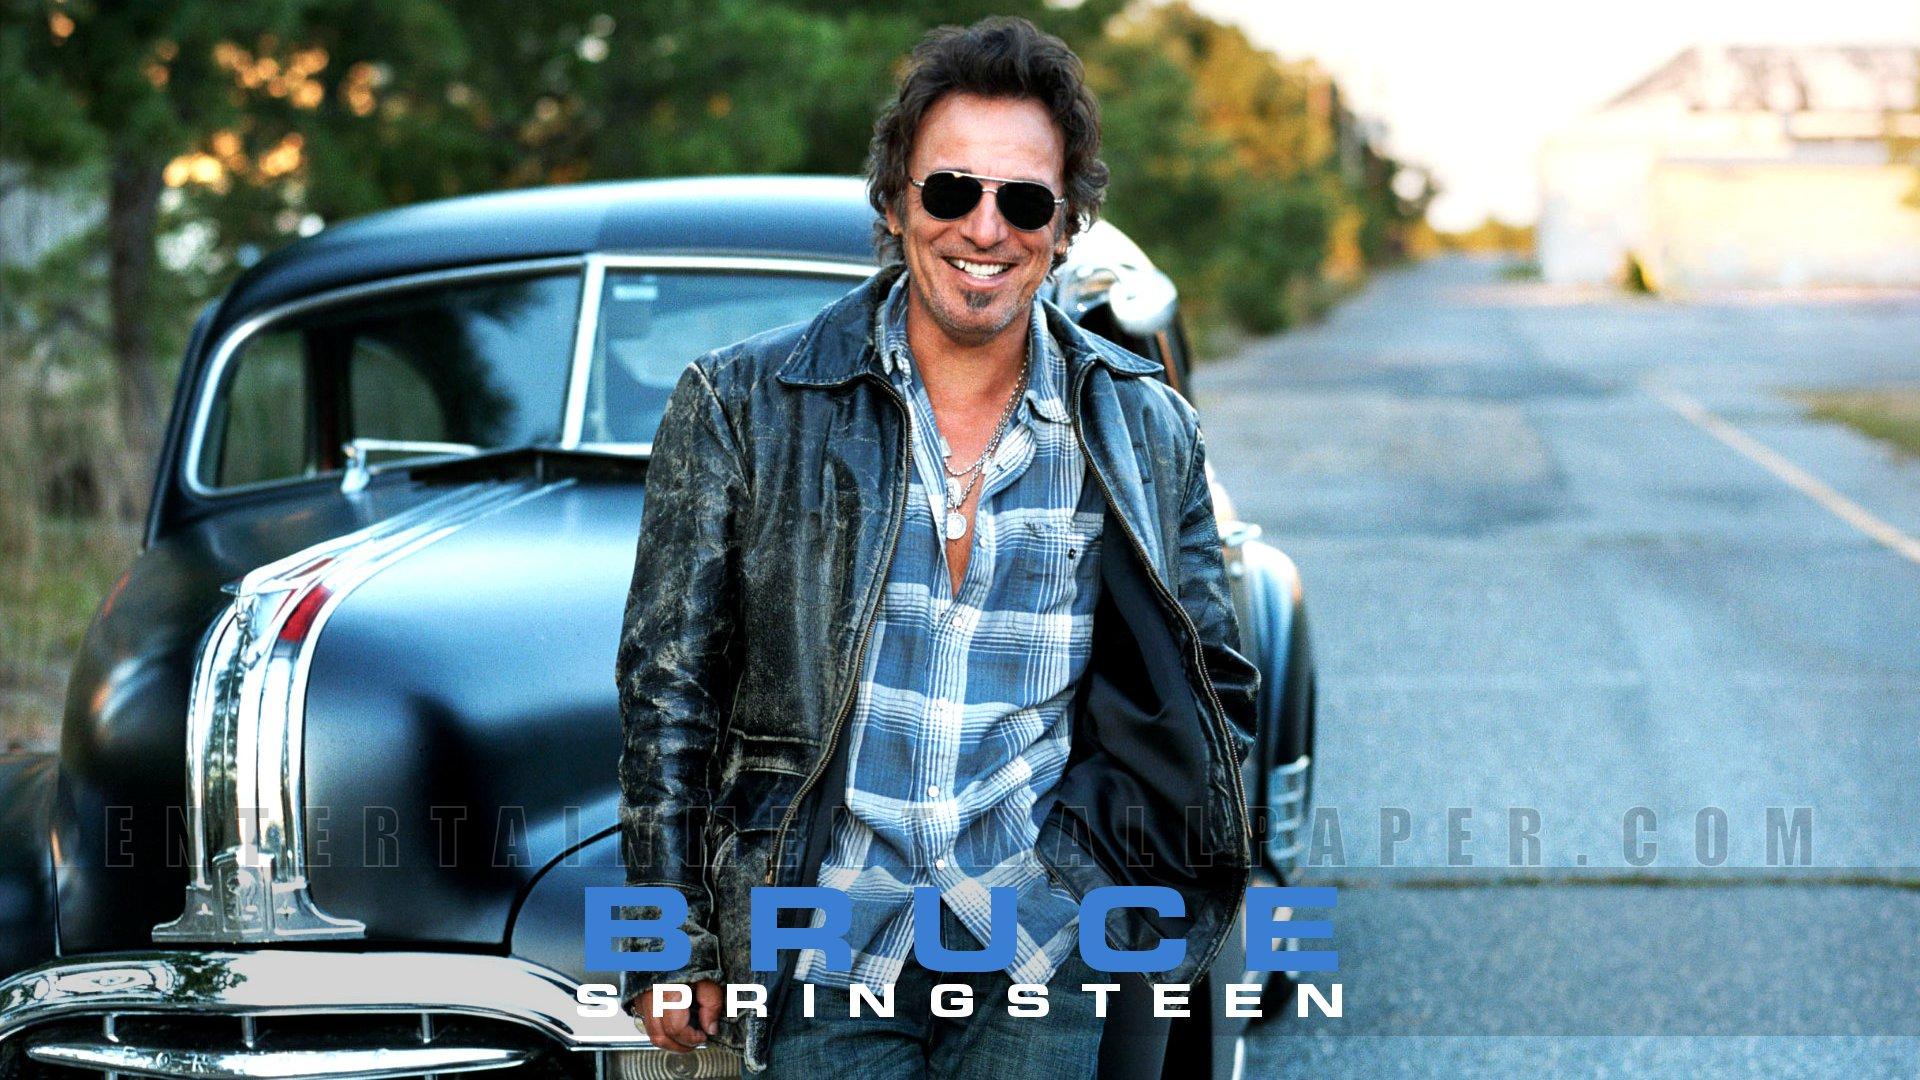 Quality Bruce Springsteen Wallpaper for cool people. Bruce